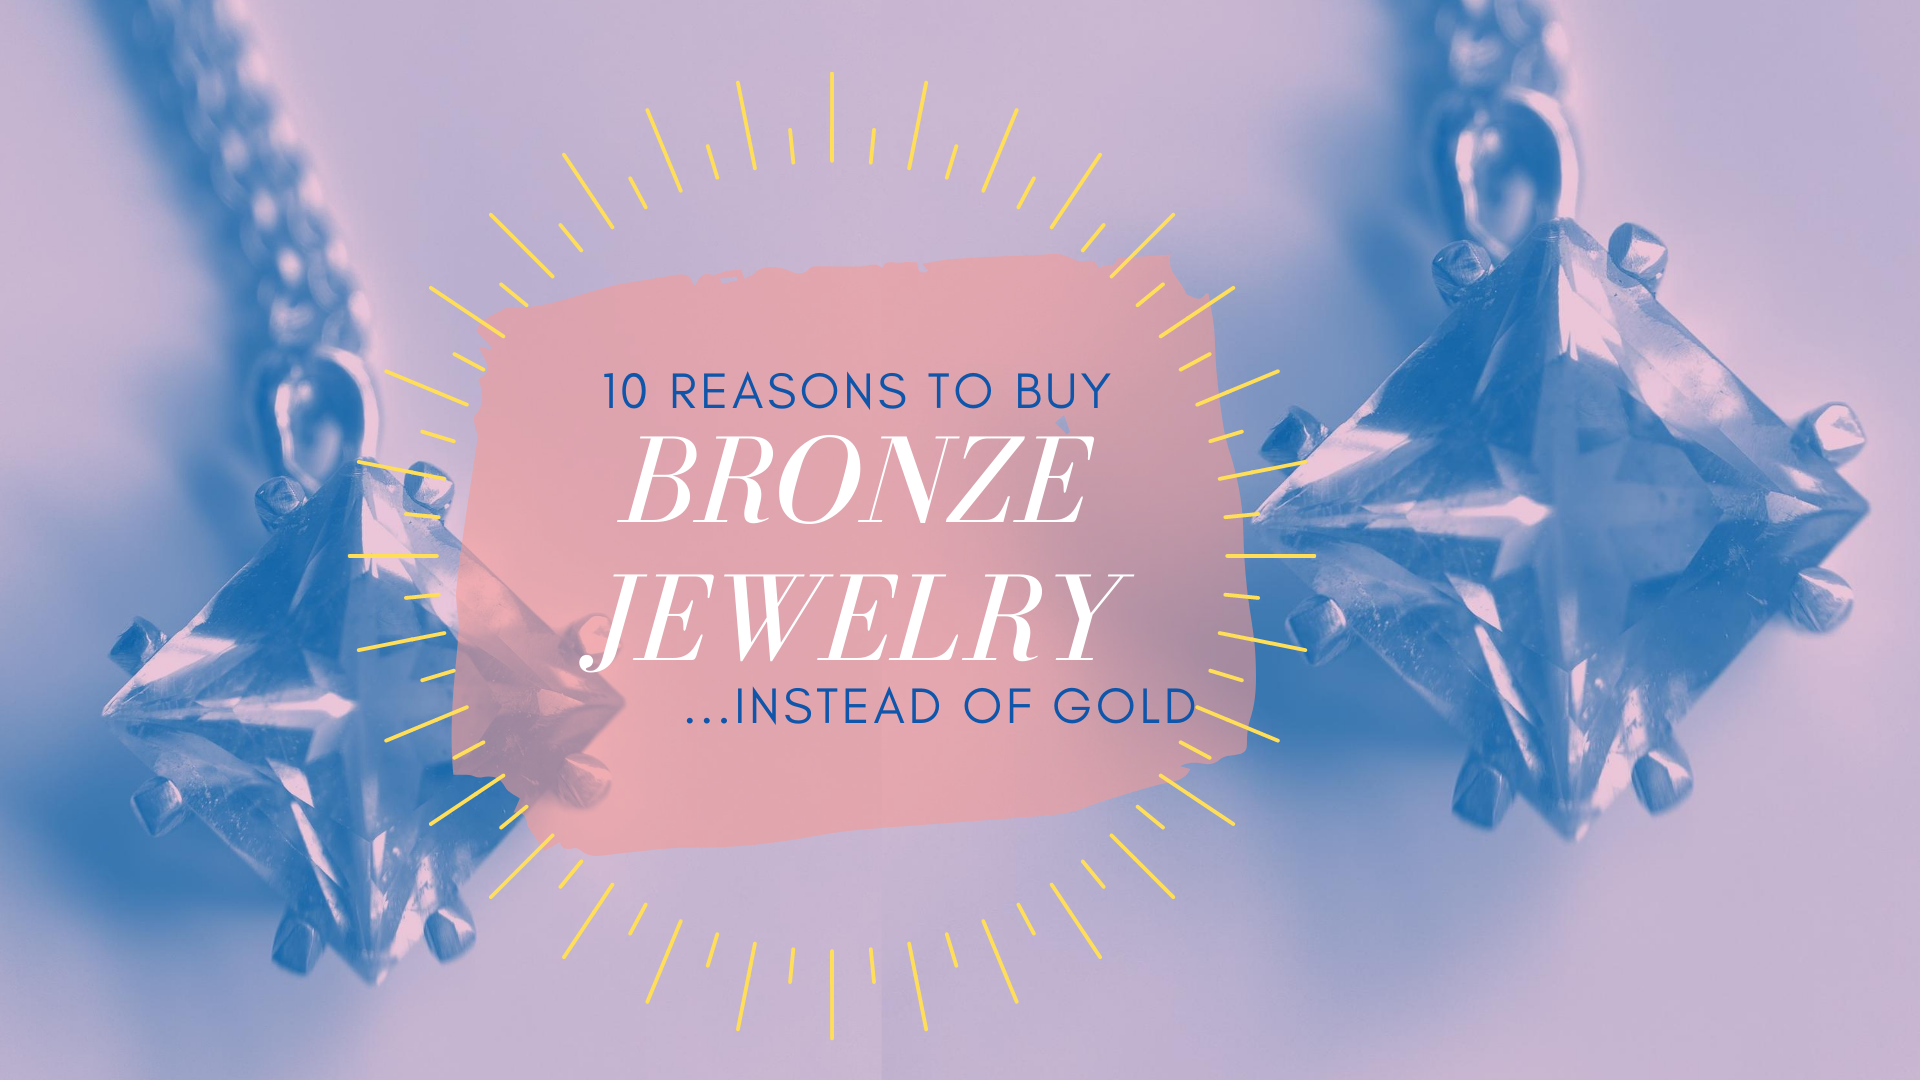 14K Gold Jewelry vs Bronze Jewelry: When and Why to Choose 14K Gold